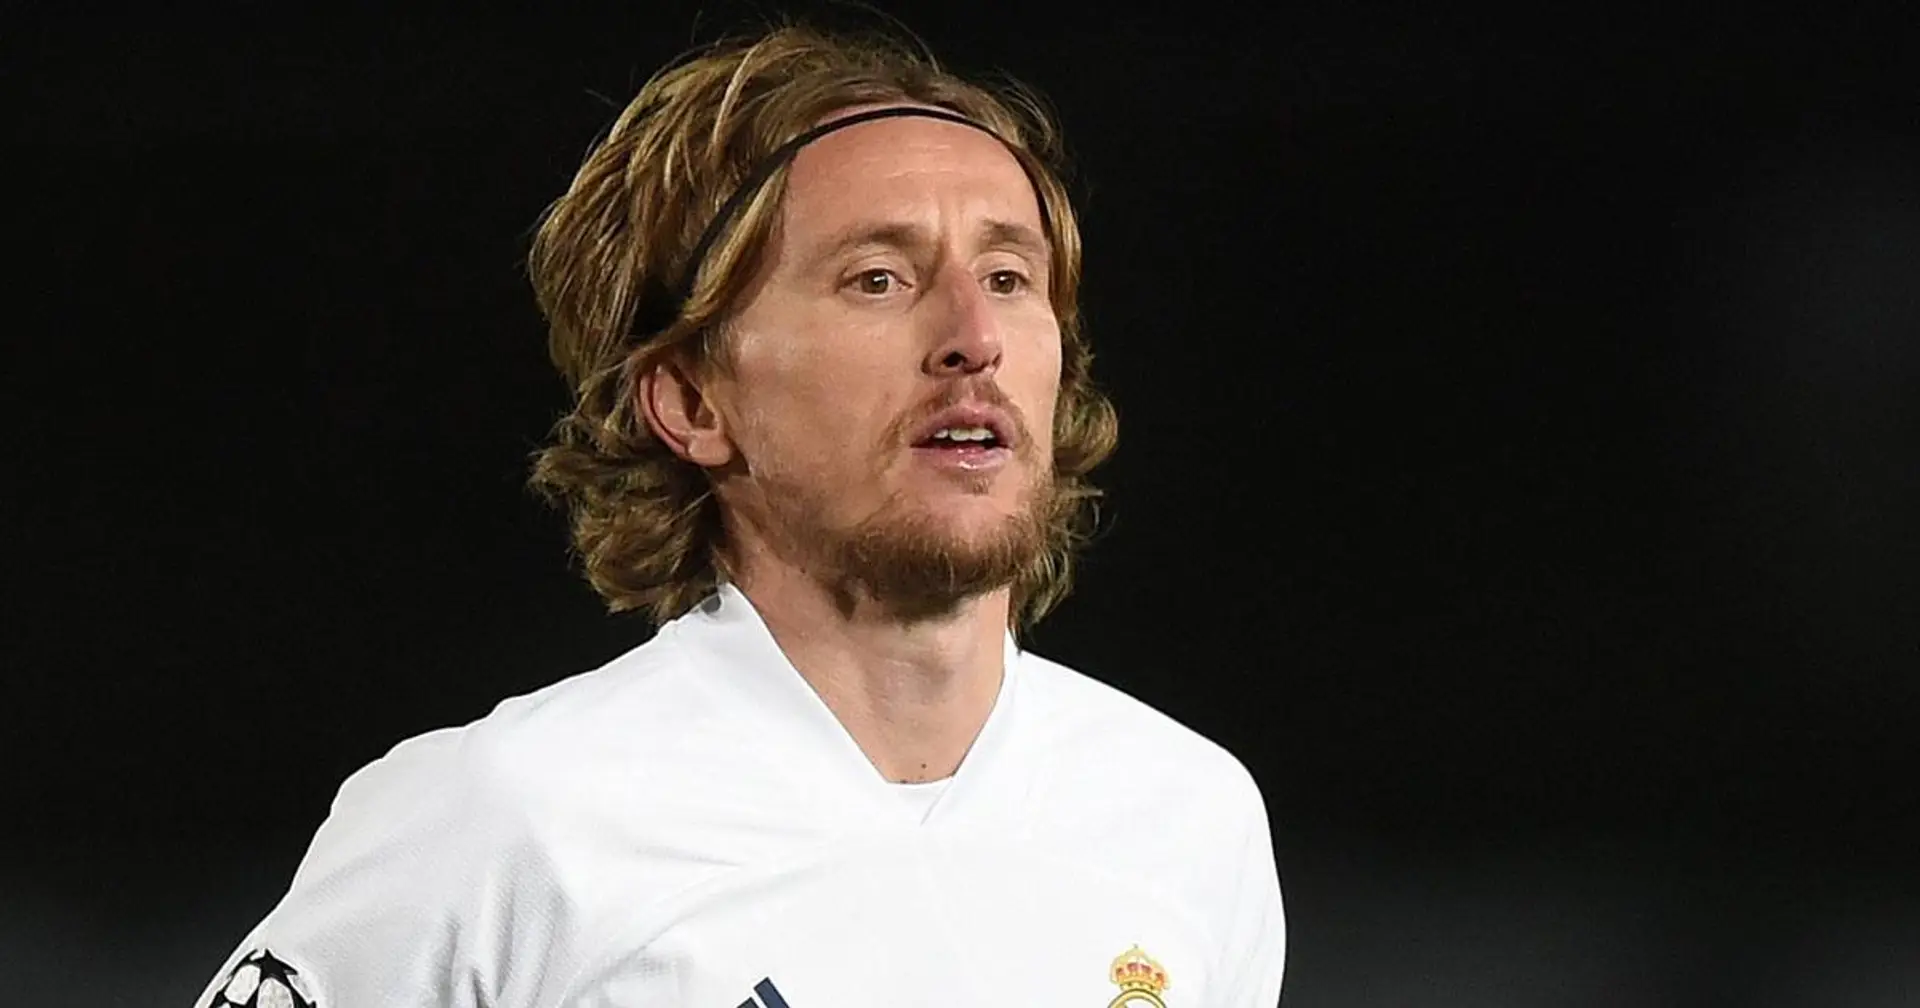 'I'm not worried': Modric's former manager addresses Luka burnout fears